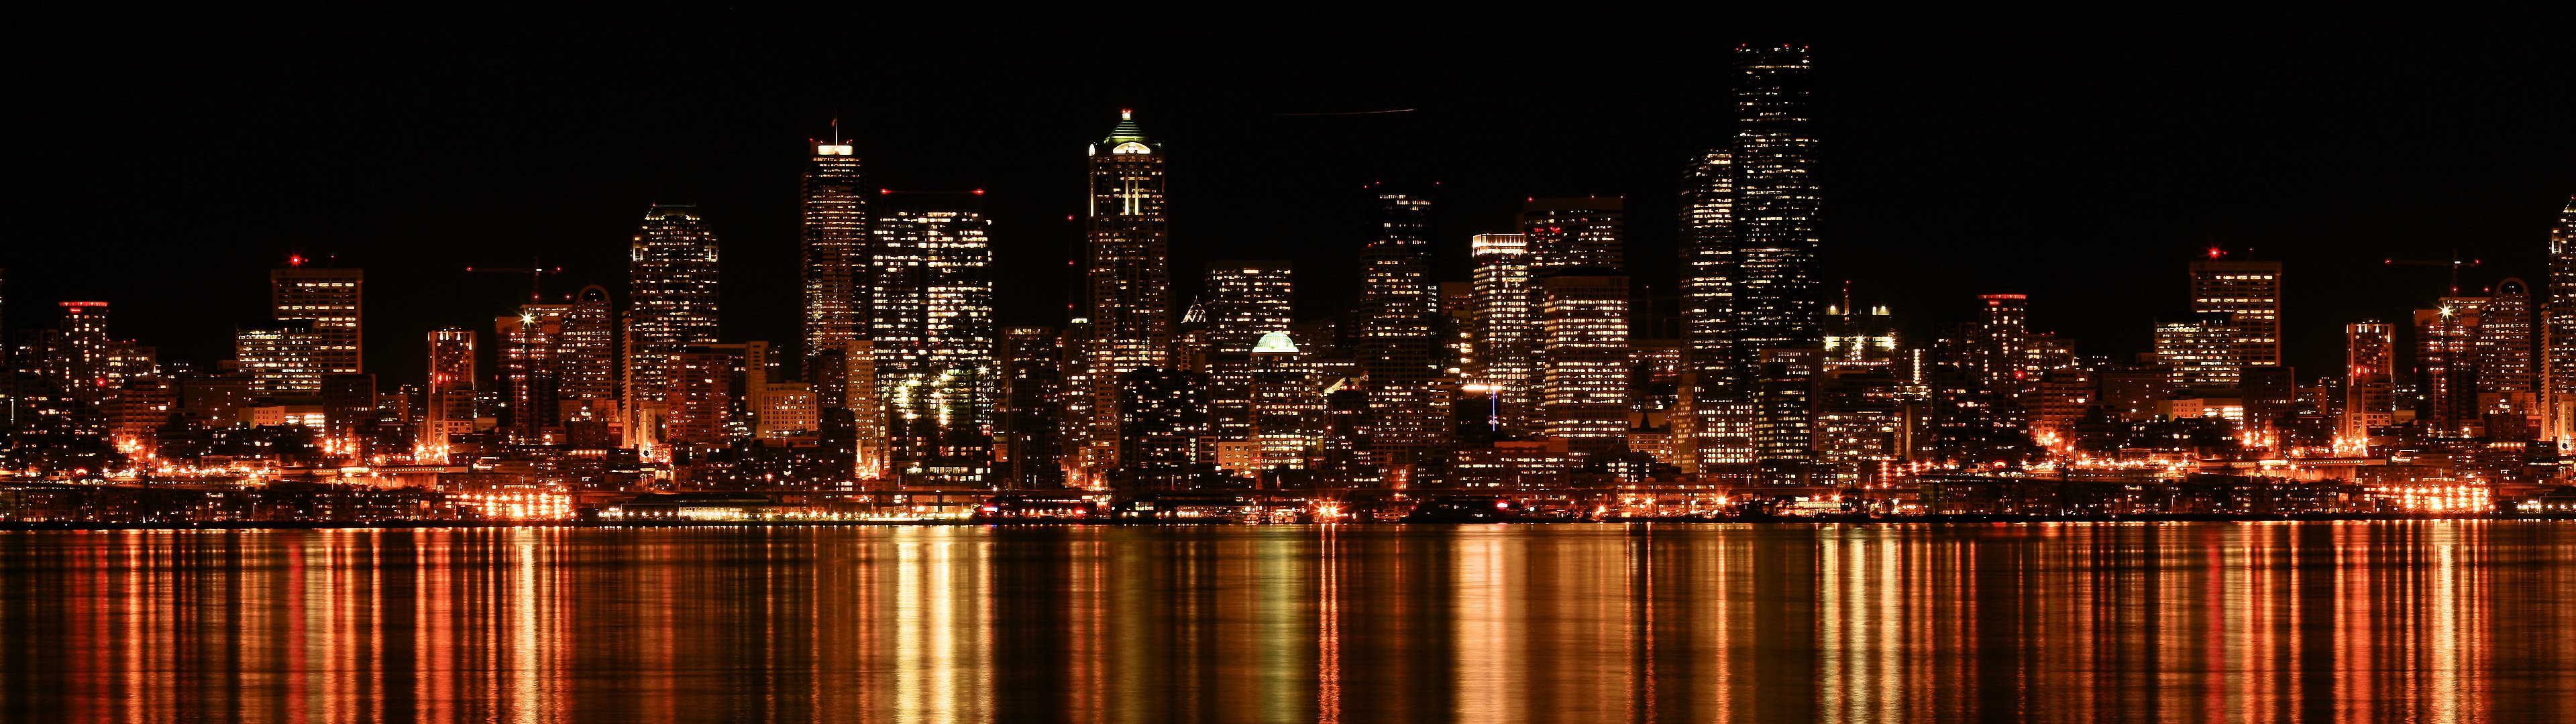 cityscapes, Night, Buildings, Reflections Wallpaper